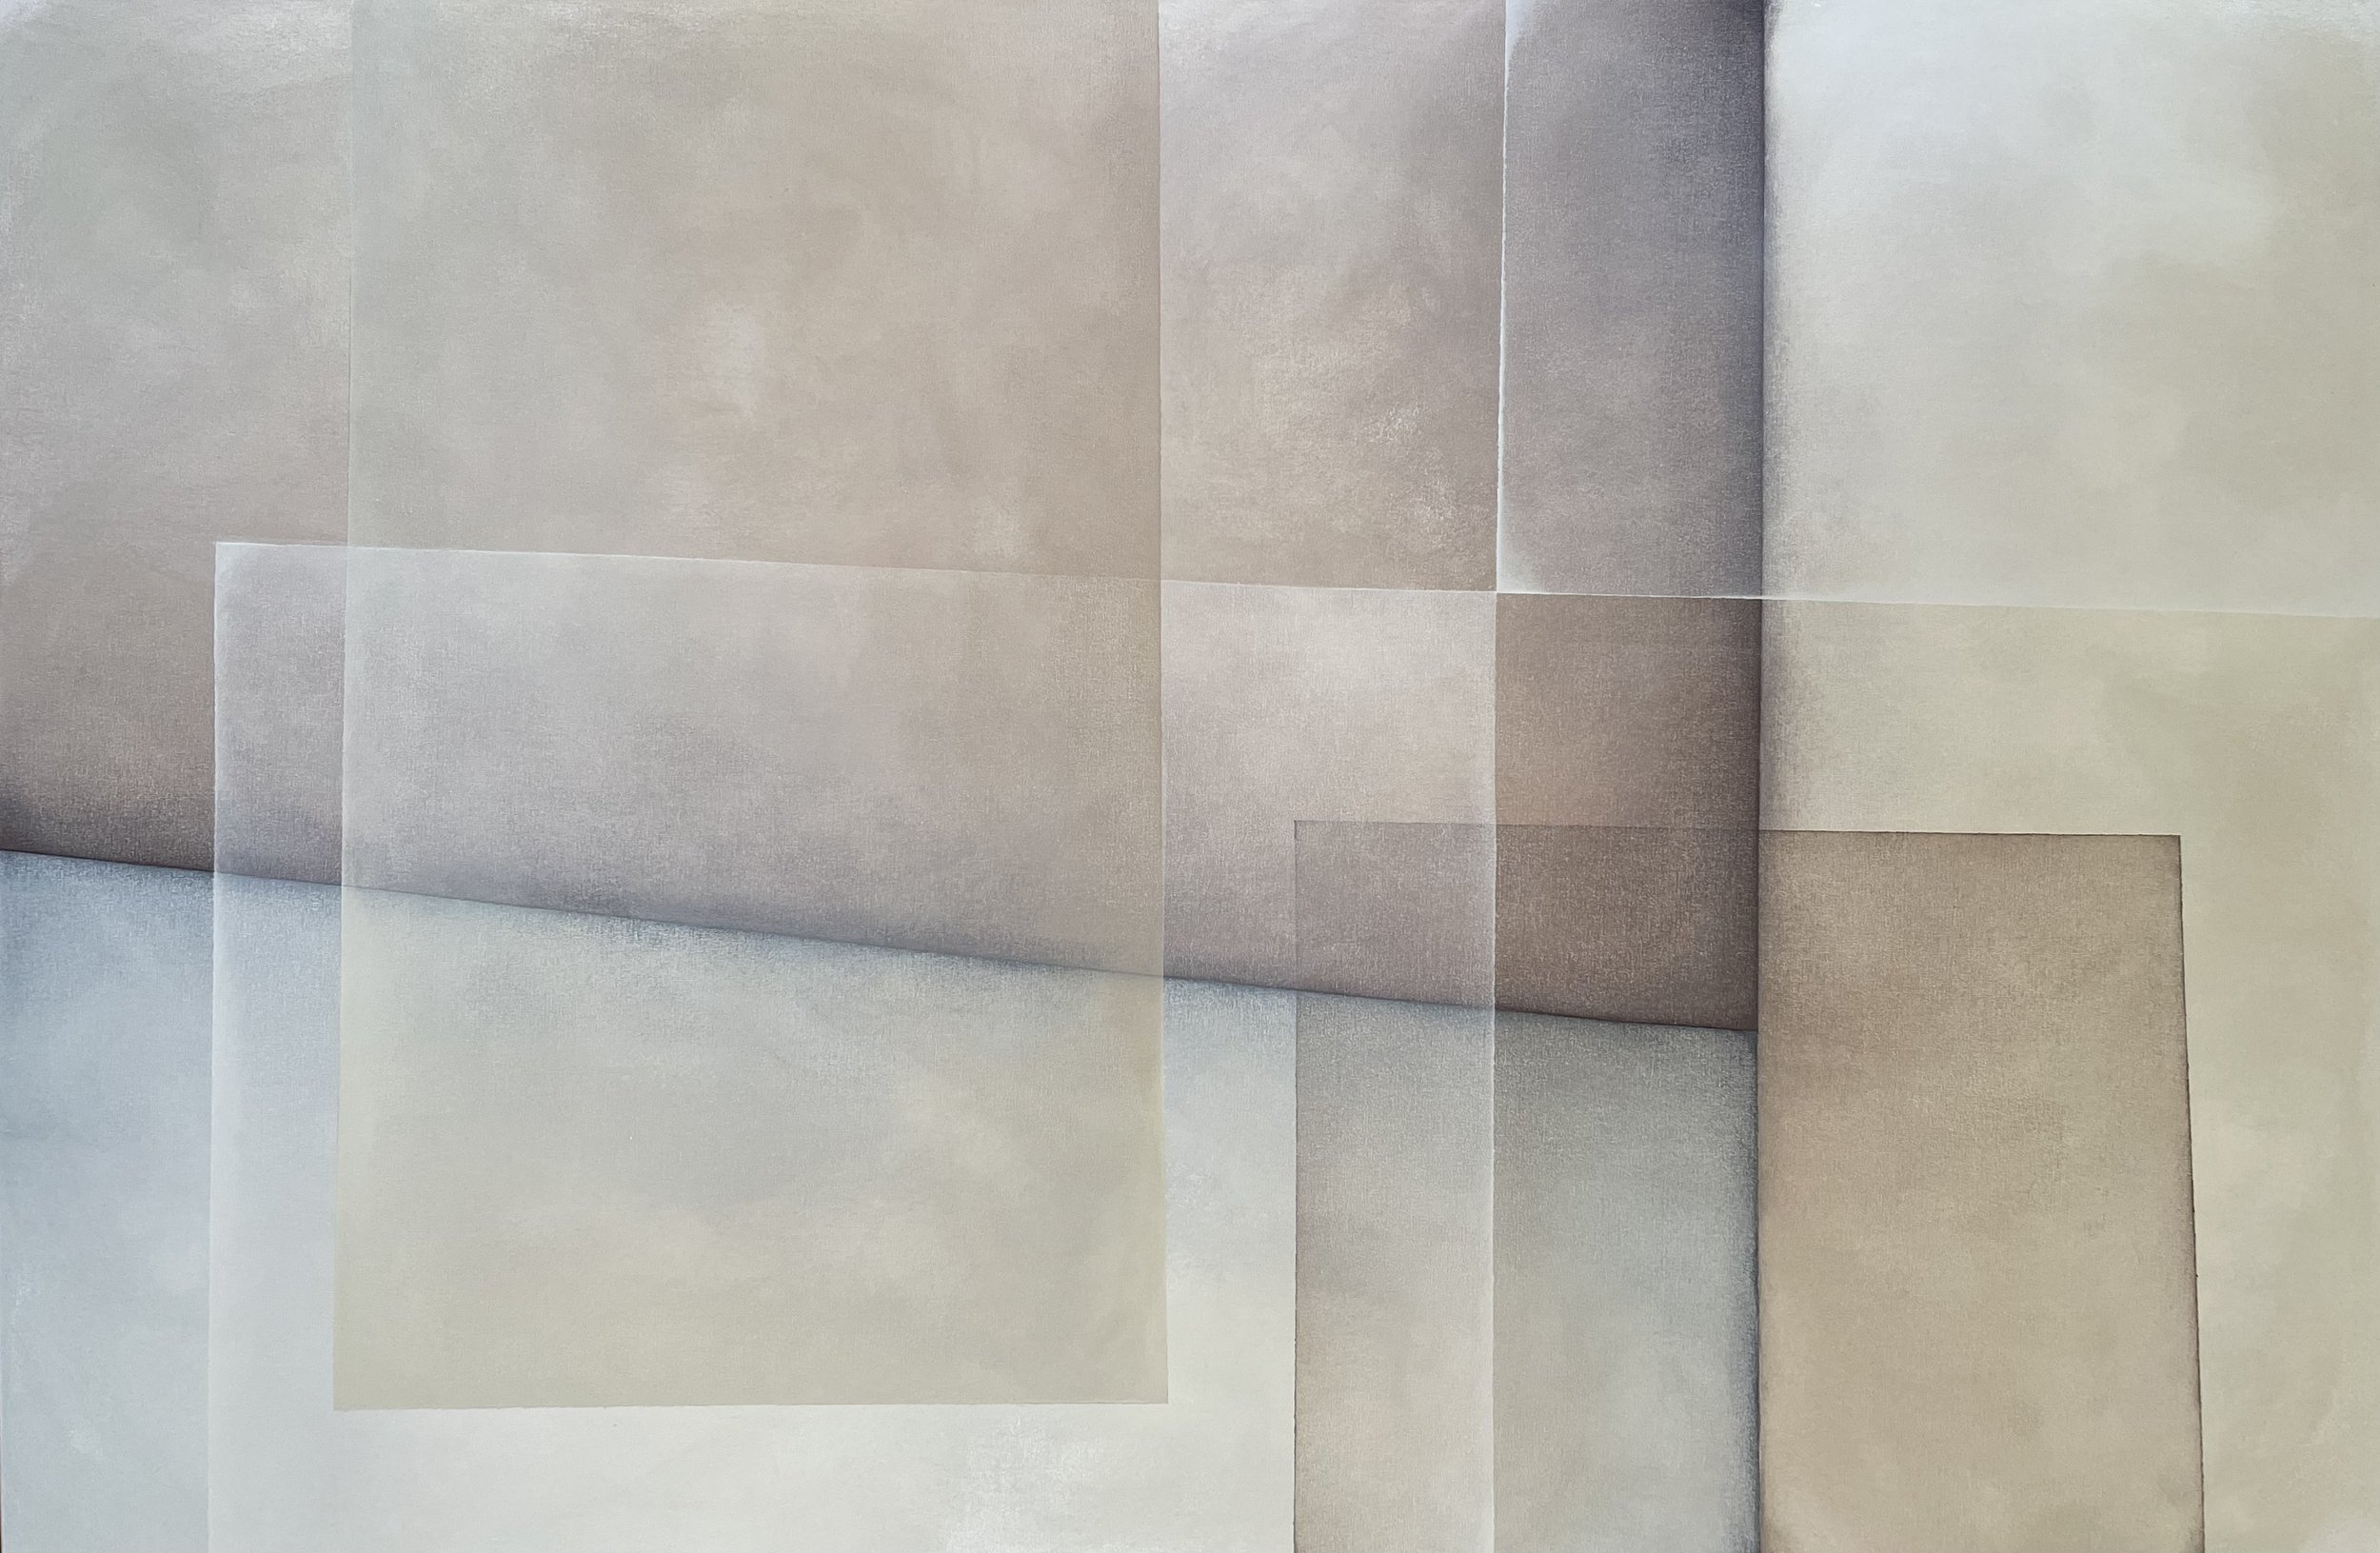 Lightness in Warm Grey II | 2022 | 48 x 72 inches, can be oriented vertically or horizontally | acrylic on canvas | $6,400